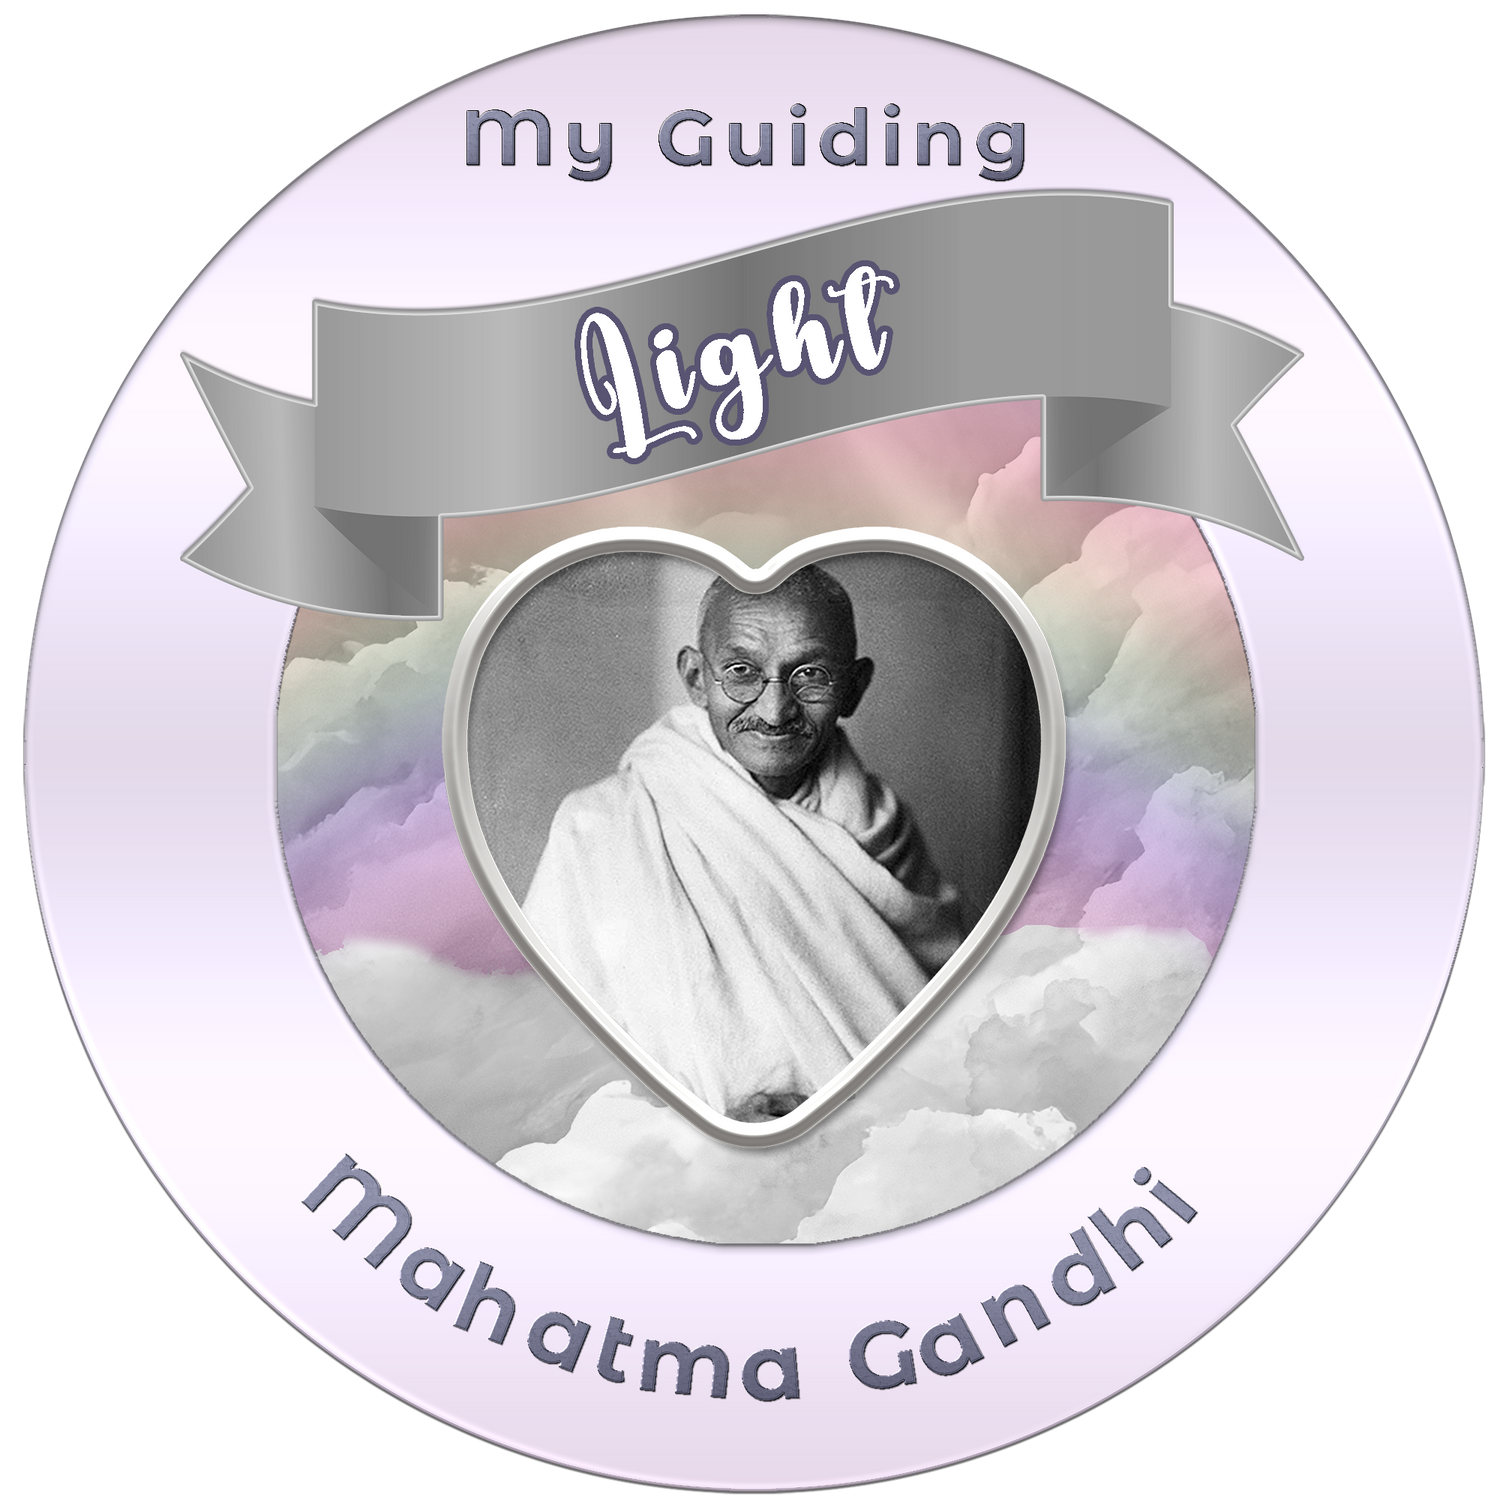 Mahatma Gandhi - A Guiding Light For Justice and Freedom